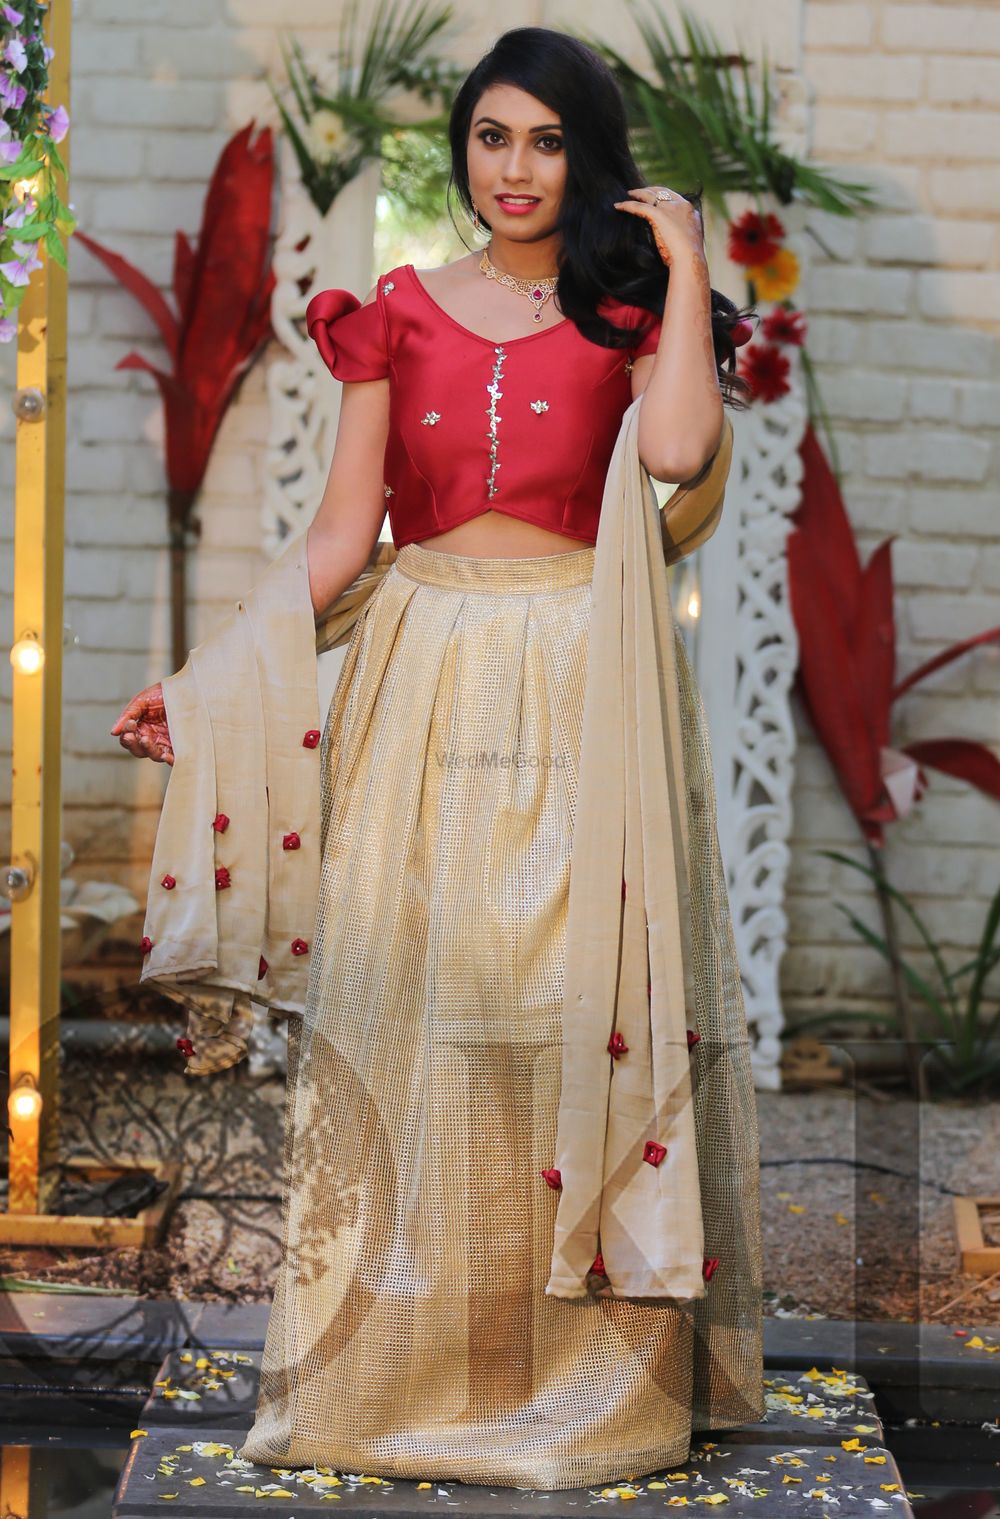 Photo From Fairytale hand-embroidered Red and Gold Princess lehengas - By OKI